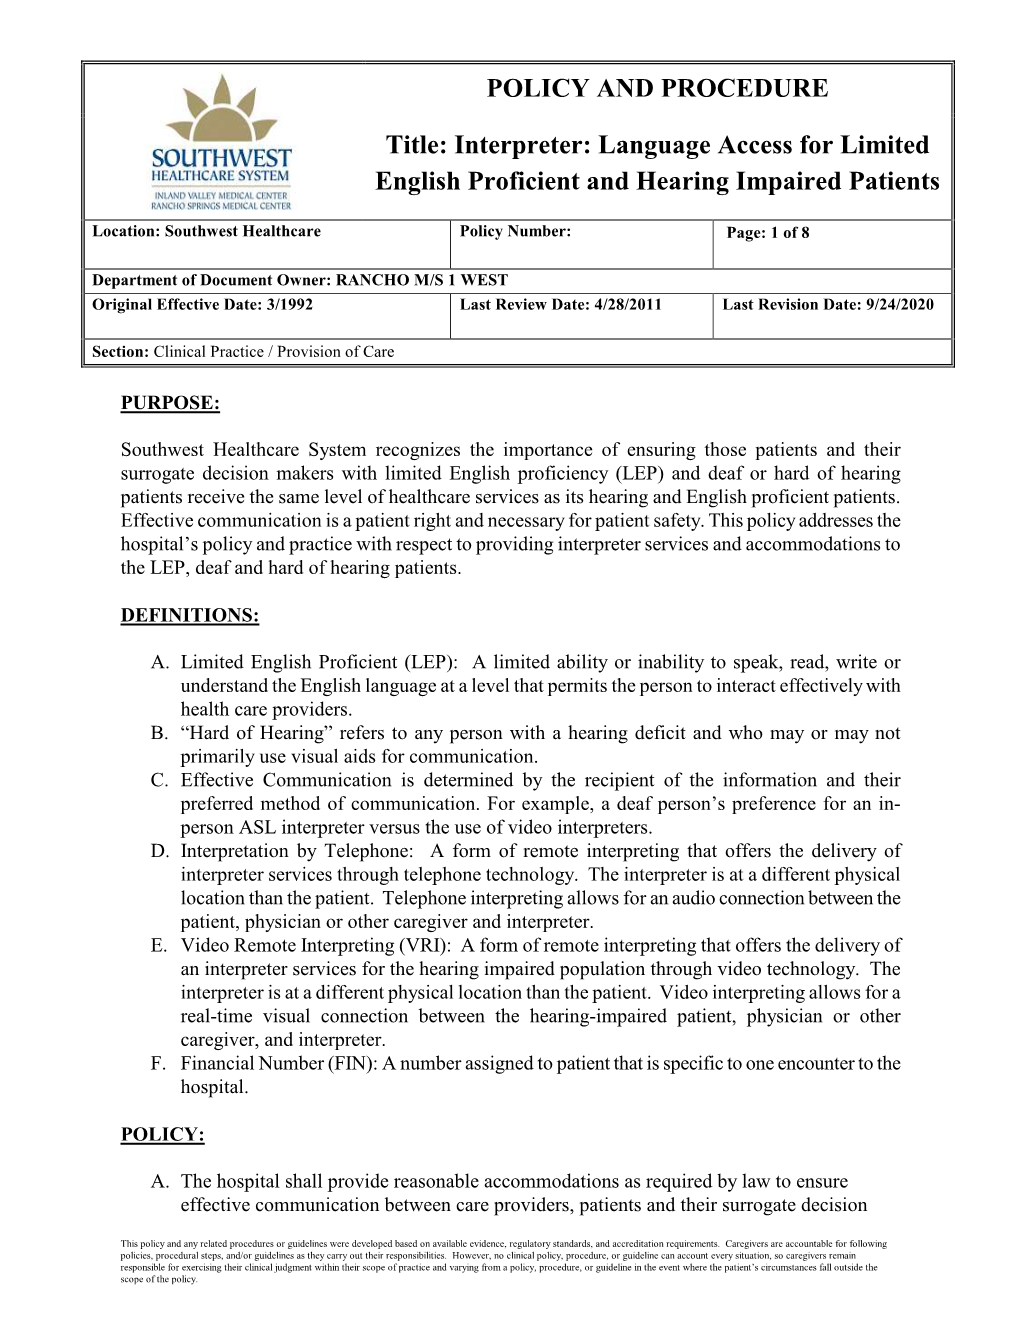 Interpreter: Language Access for Limited English Proficient-Hearing